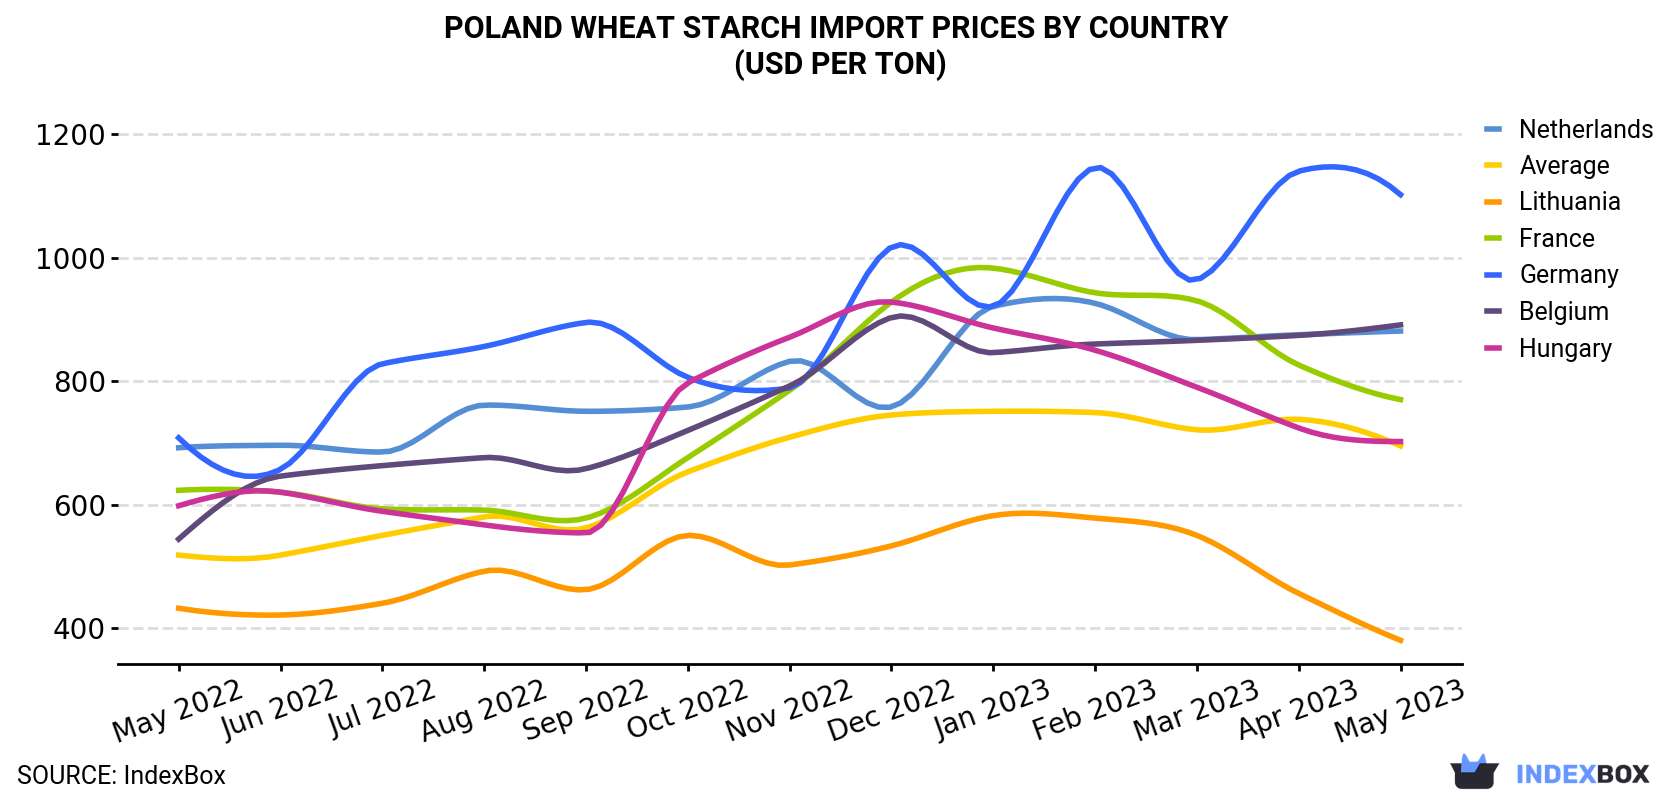 Poland Wheat Starch Import Prices By Country (USD Per Ton)